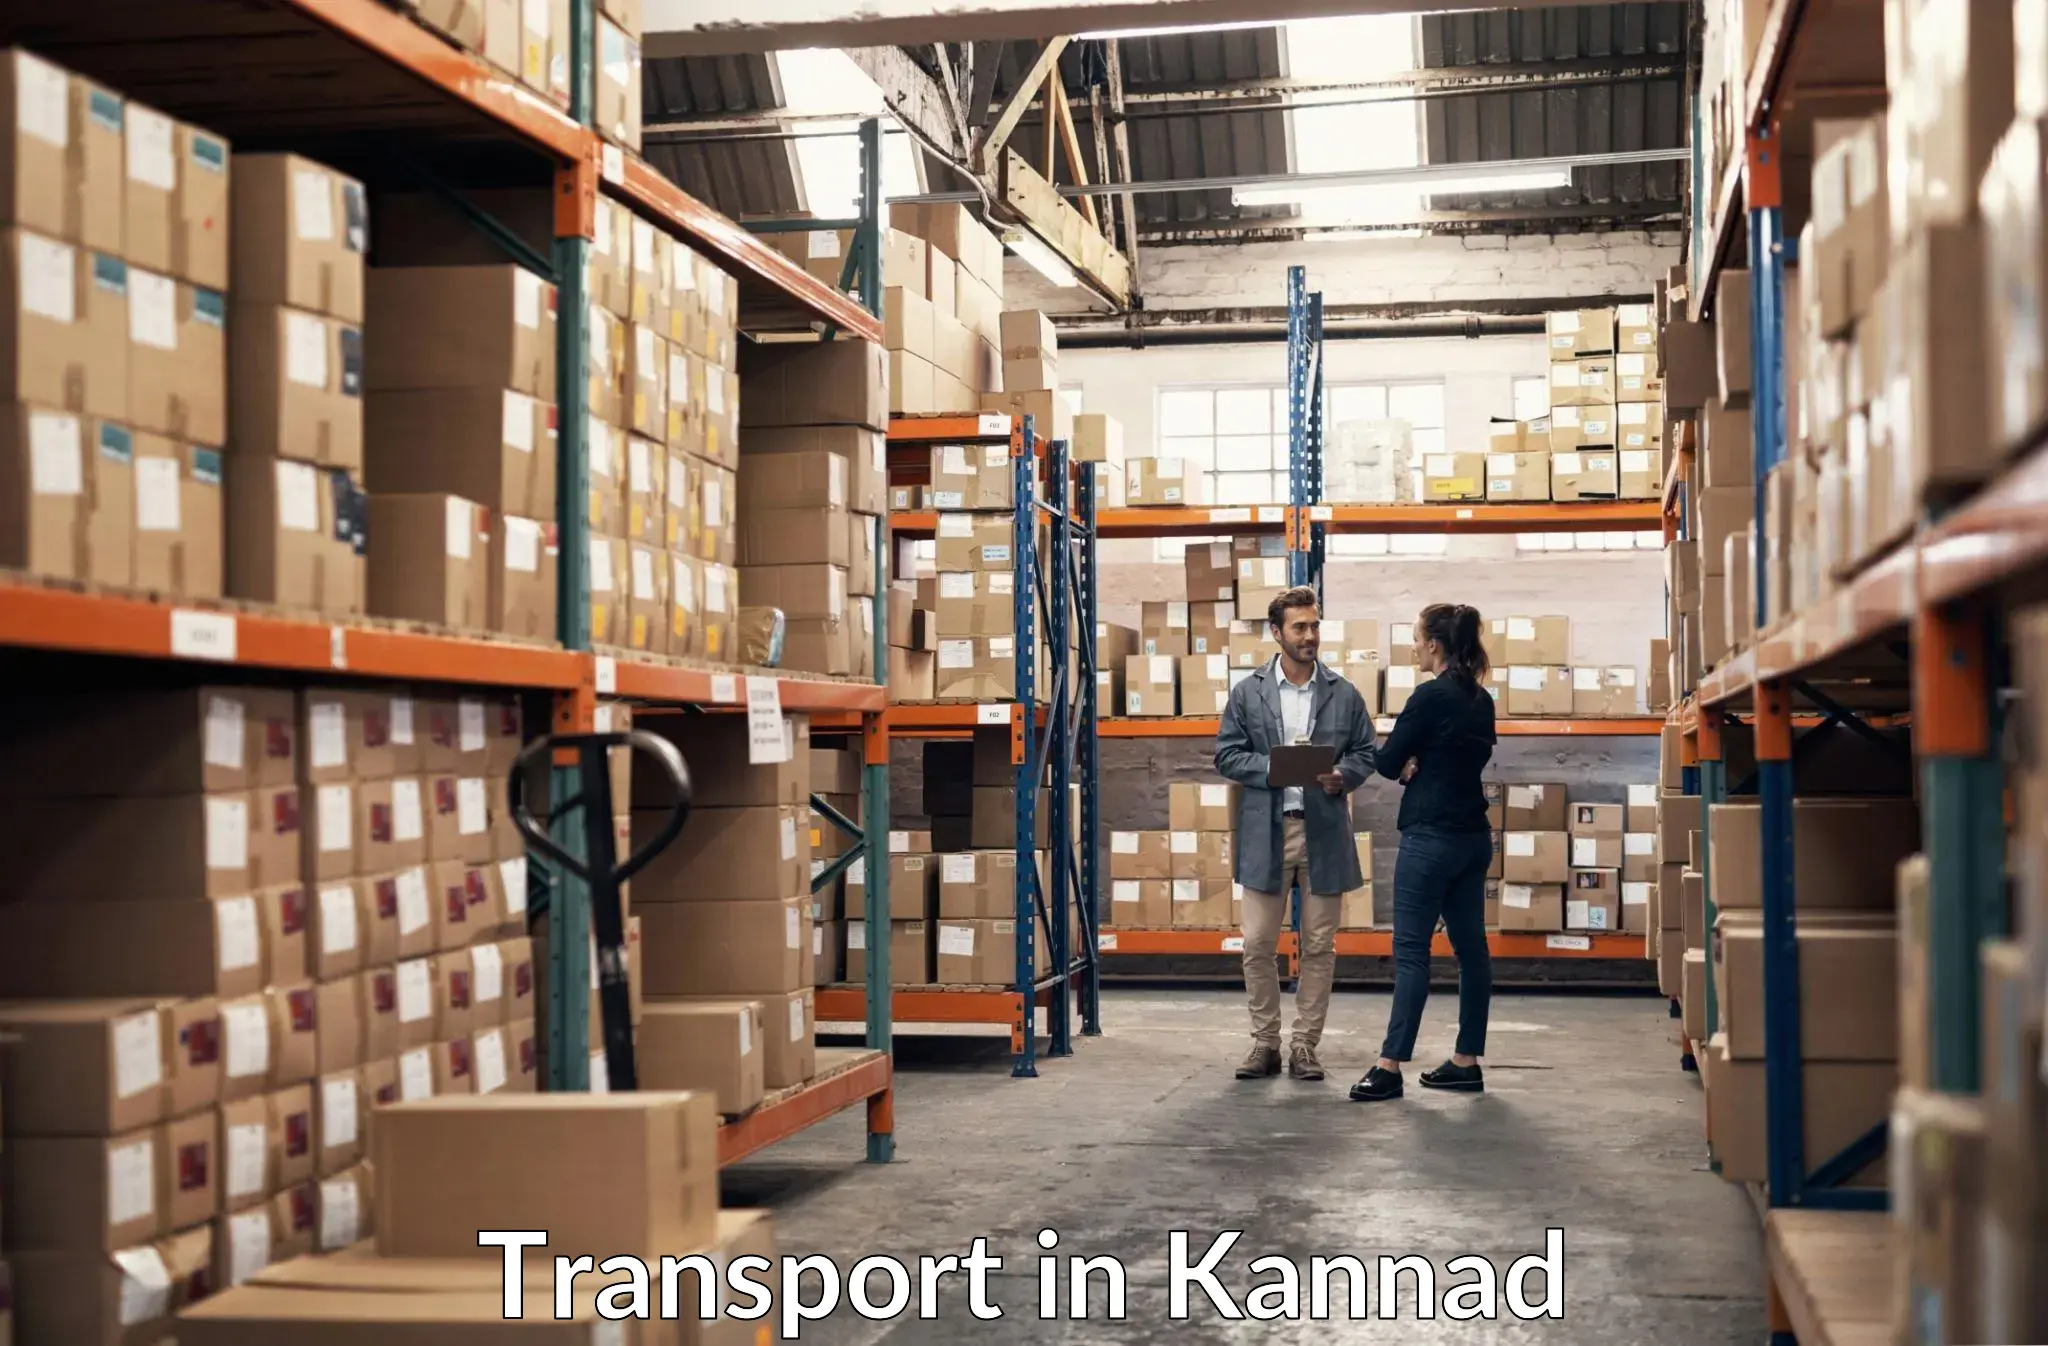 Air freight transport services in Kannad